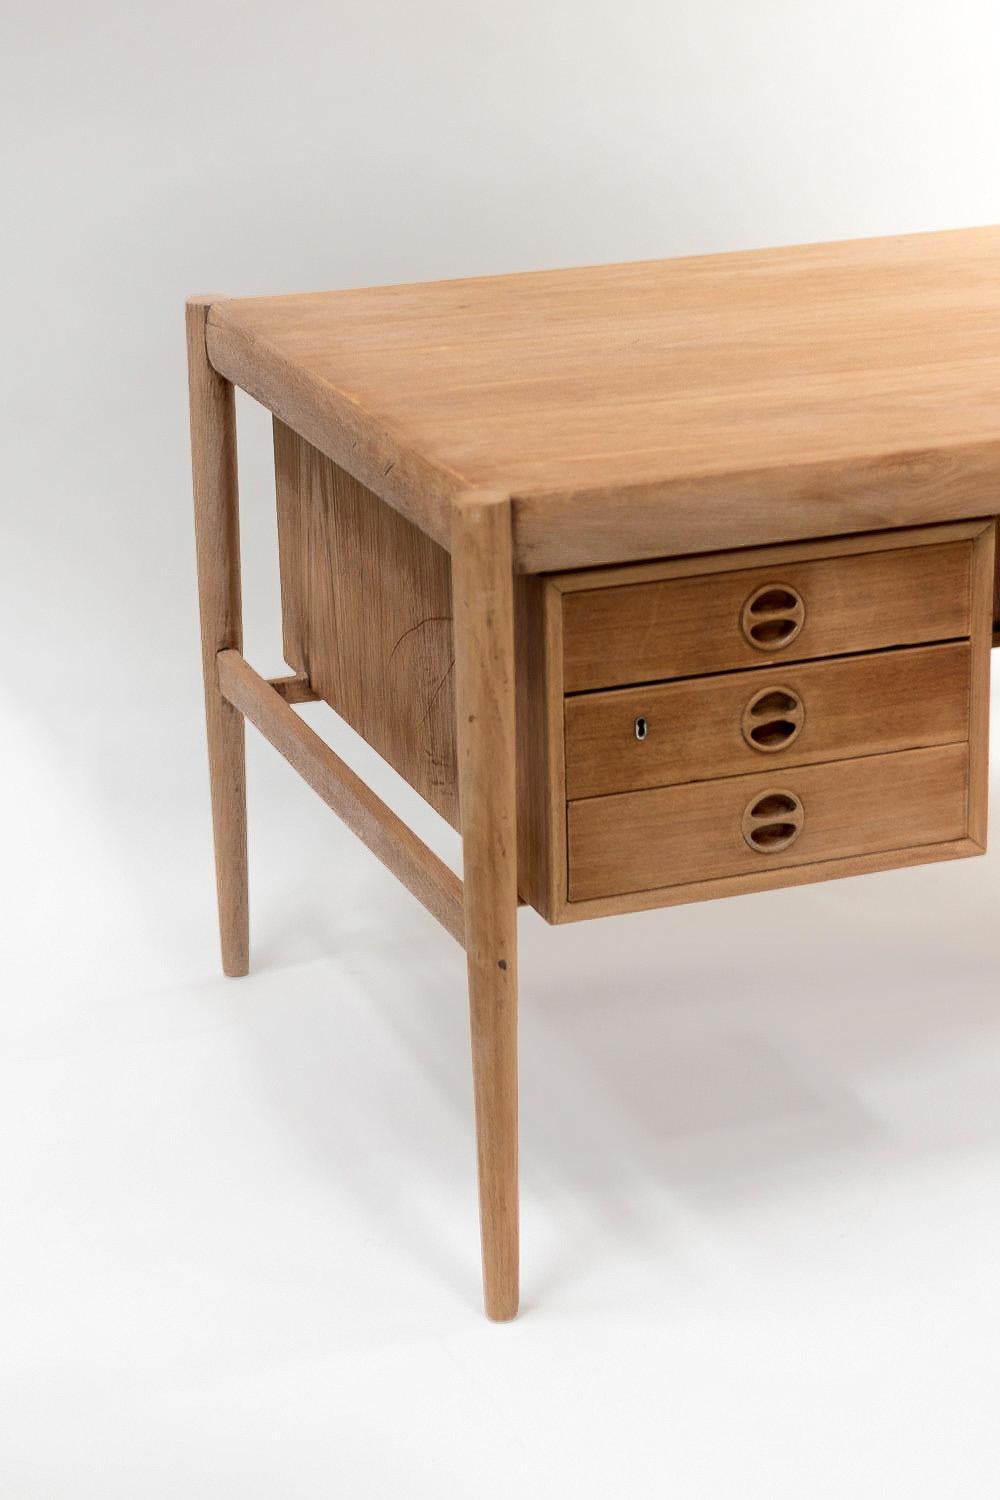 Scandinavian natural teak desk made of two boxes with three drawers each. Rectangular top standing on four cylindrical legs: uprights detached from the boxes under the tray. Circular handles inside drawer’s facade.

Scandinavian work realized